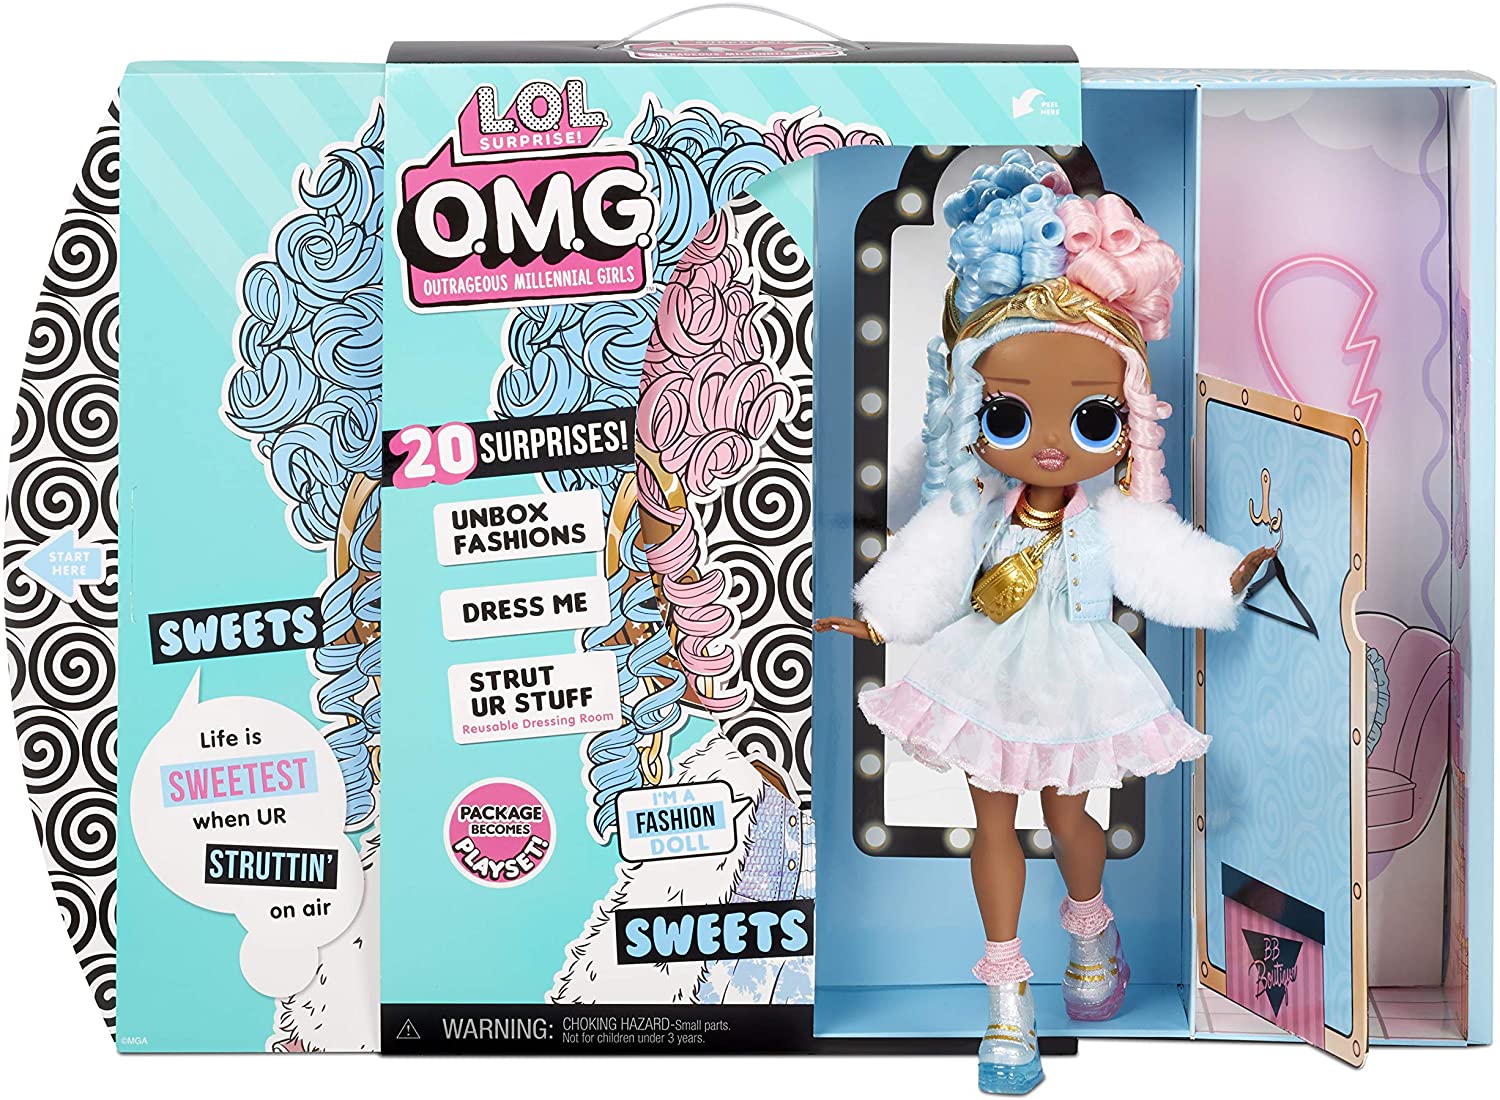 L.O.L. Surprise OMG Sweets Fashion Doll w/ 20 Surprises $14 + Free Shipping w/ Amazon Prime or Orders $25+